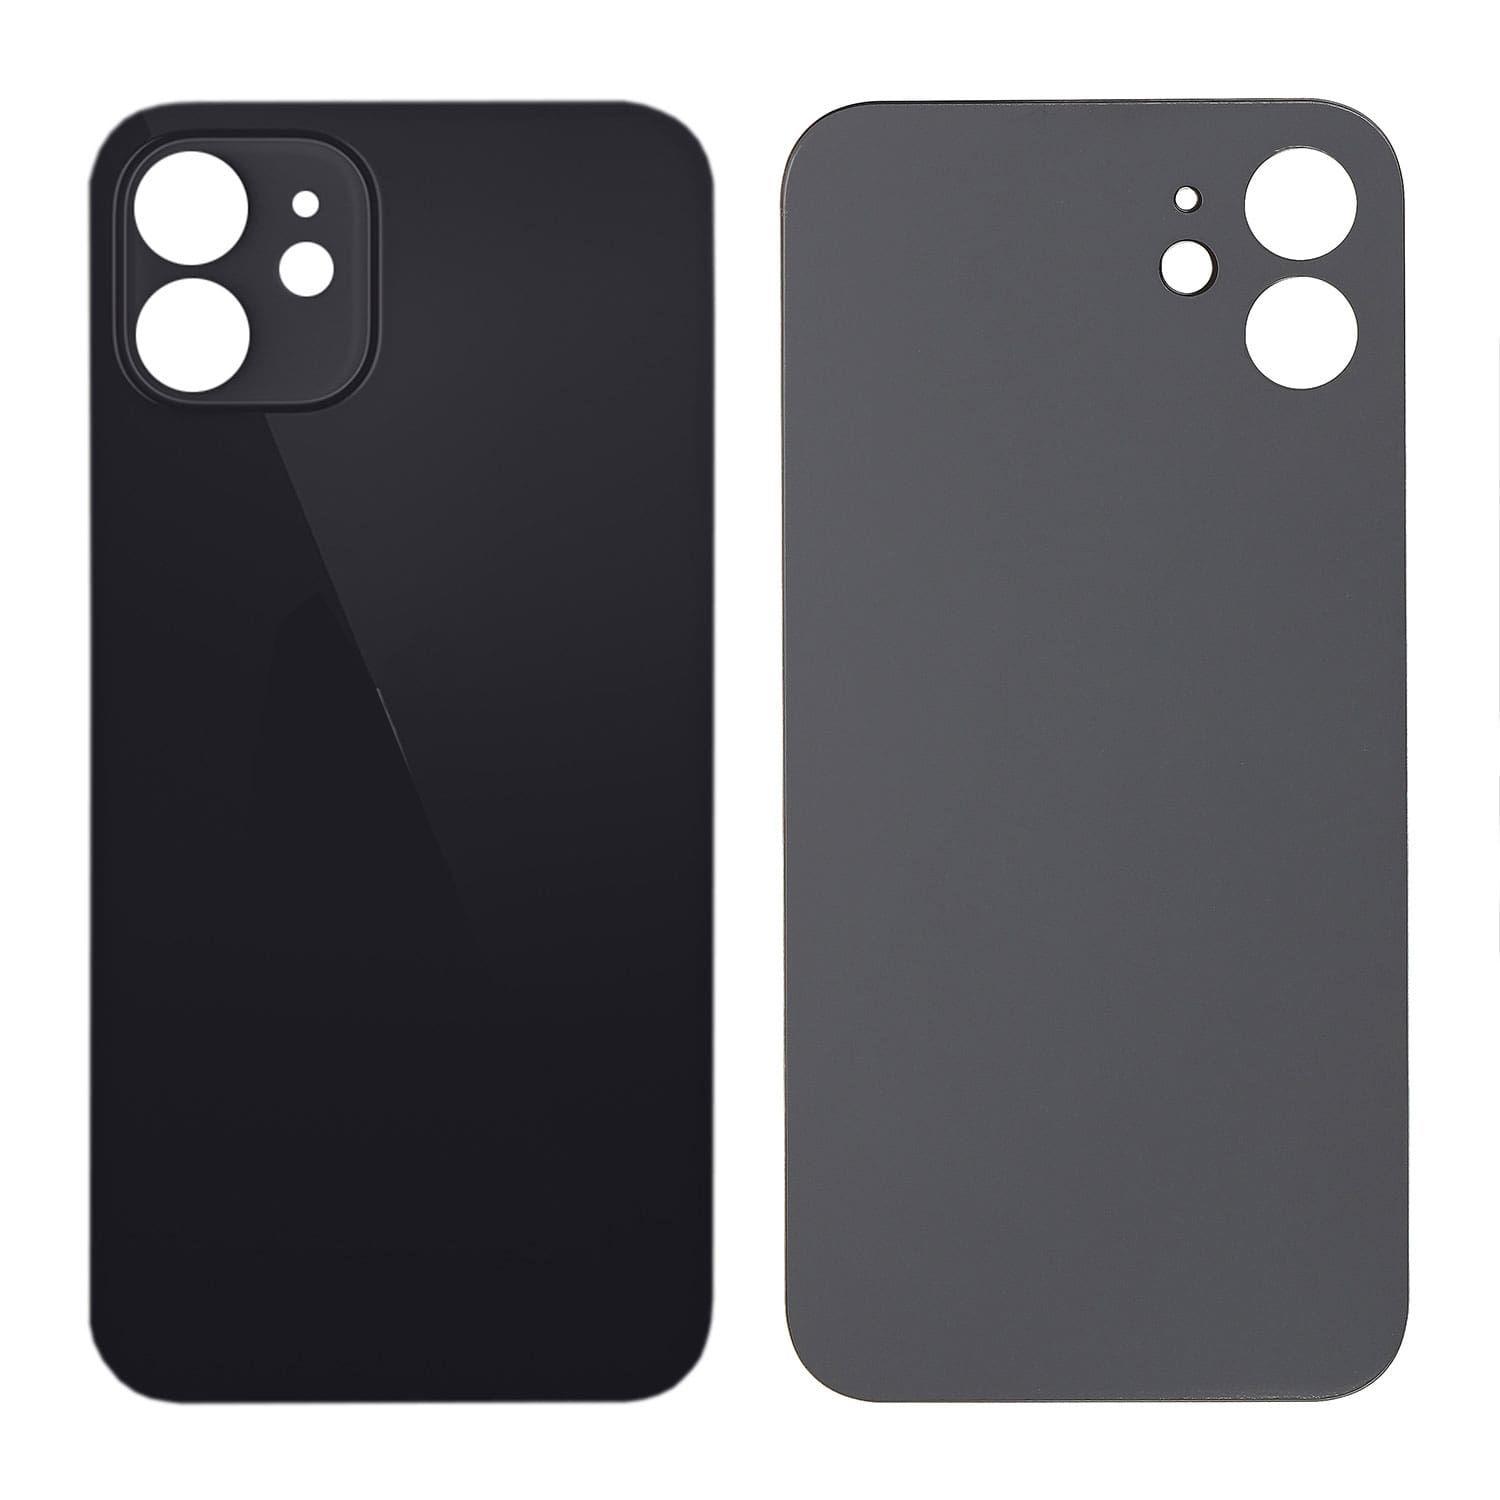 Battery cover iPhone 12 mini with bigger hole for camera glass - black